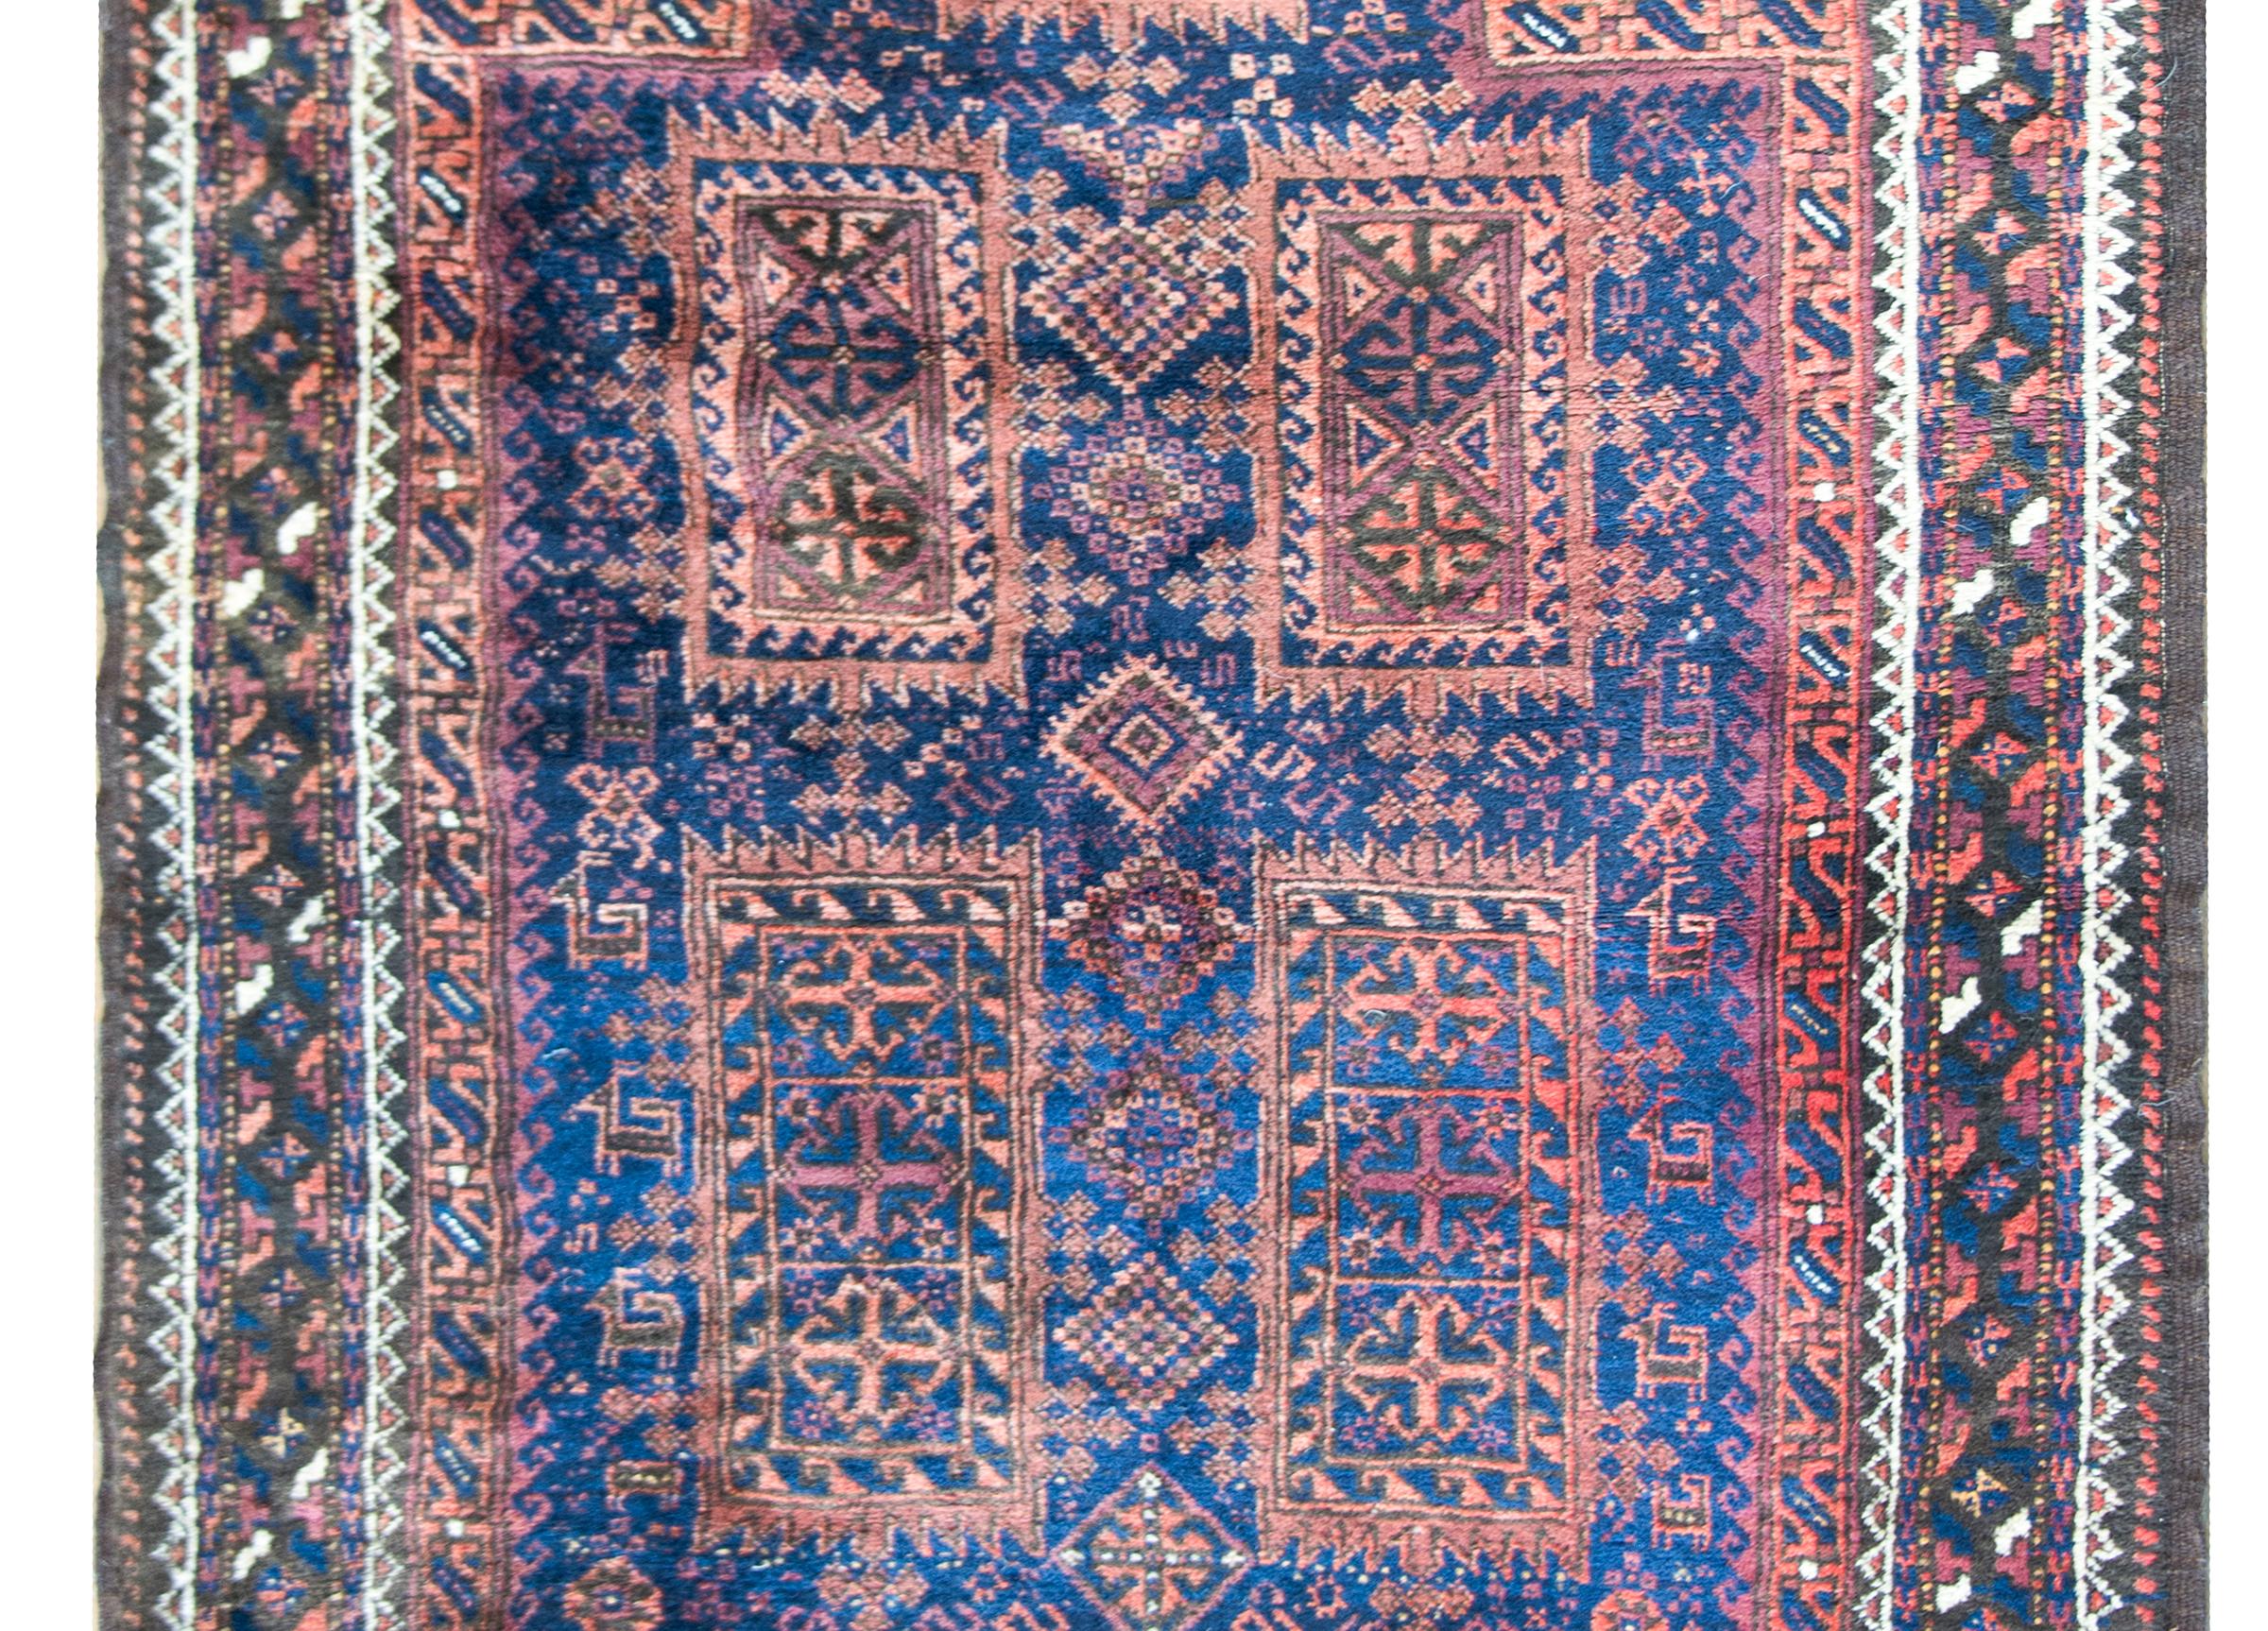 A wonderful early 20th century Persian Bluchi prayer rug with an all-over geometric and stylized floral pattern and surrounded by a complex border of multiple geometric patterned stripes, and all woven in indigo, orange, brown and white wool.